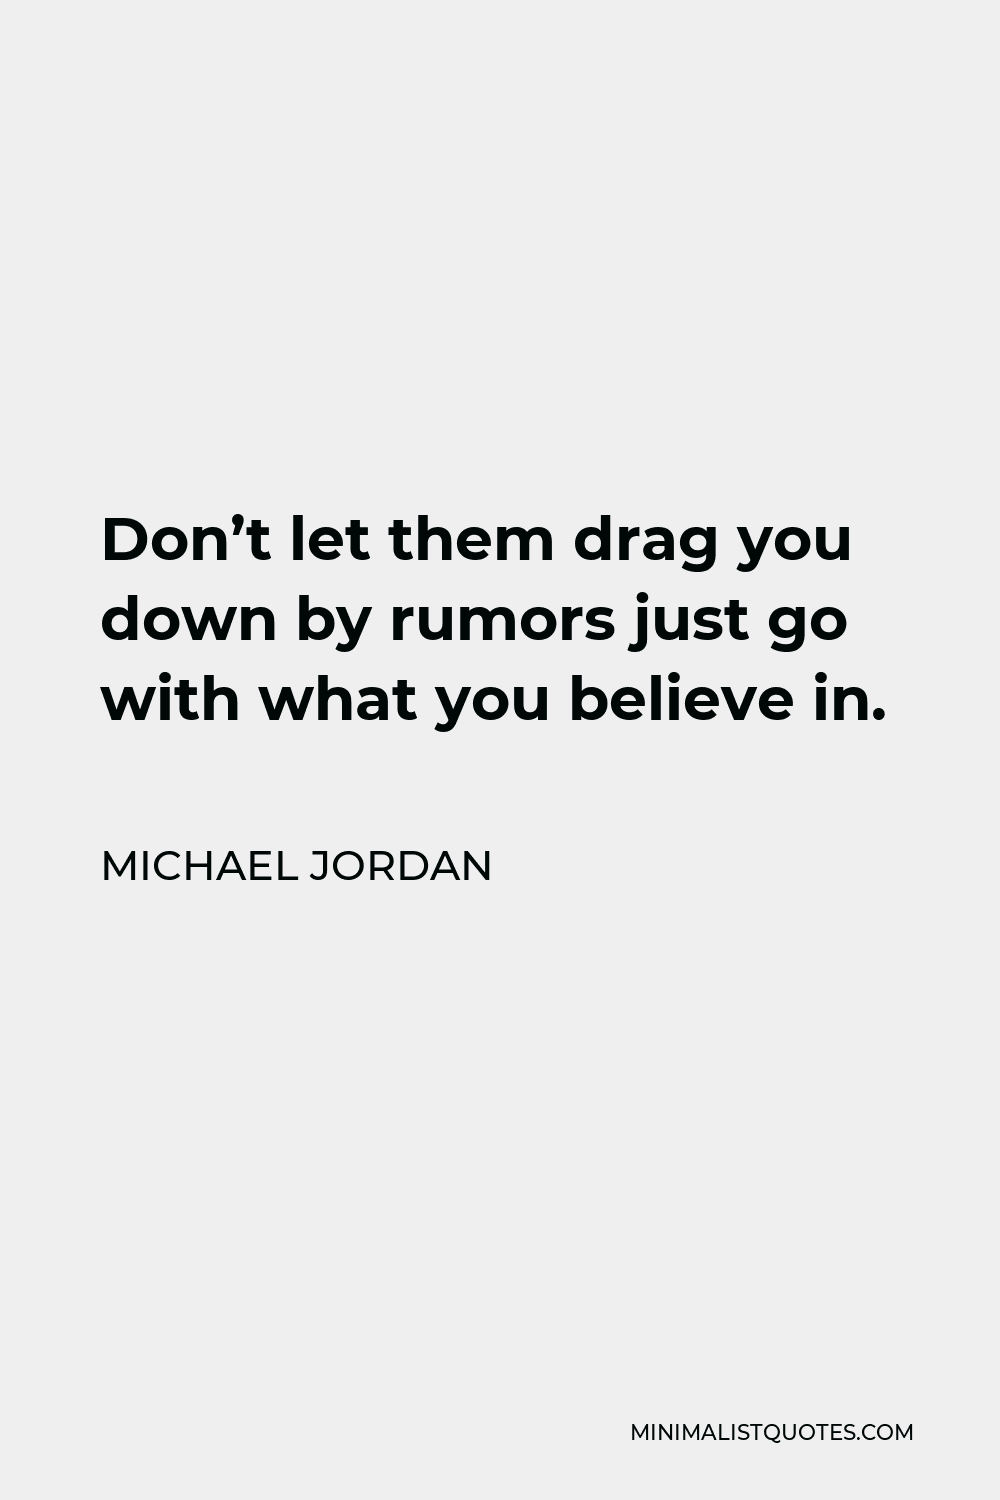 Michael Jordan Quote - Don’t let them drag you down by rumors just go with what you believe in.